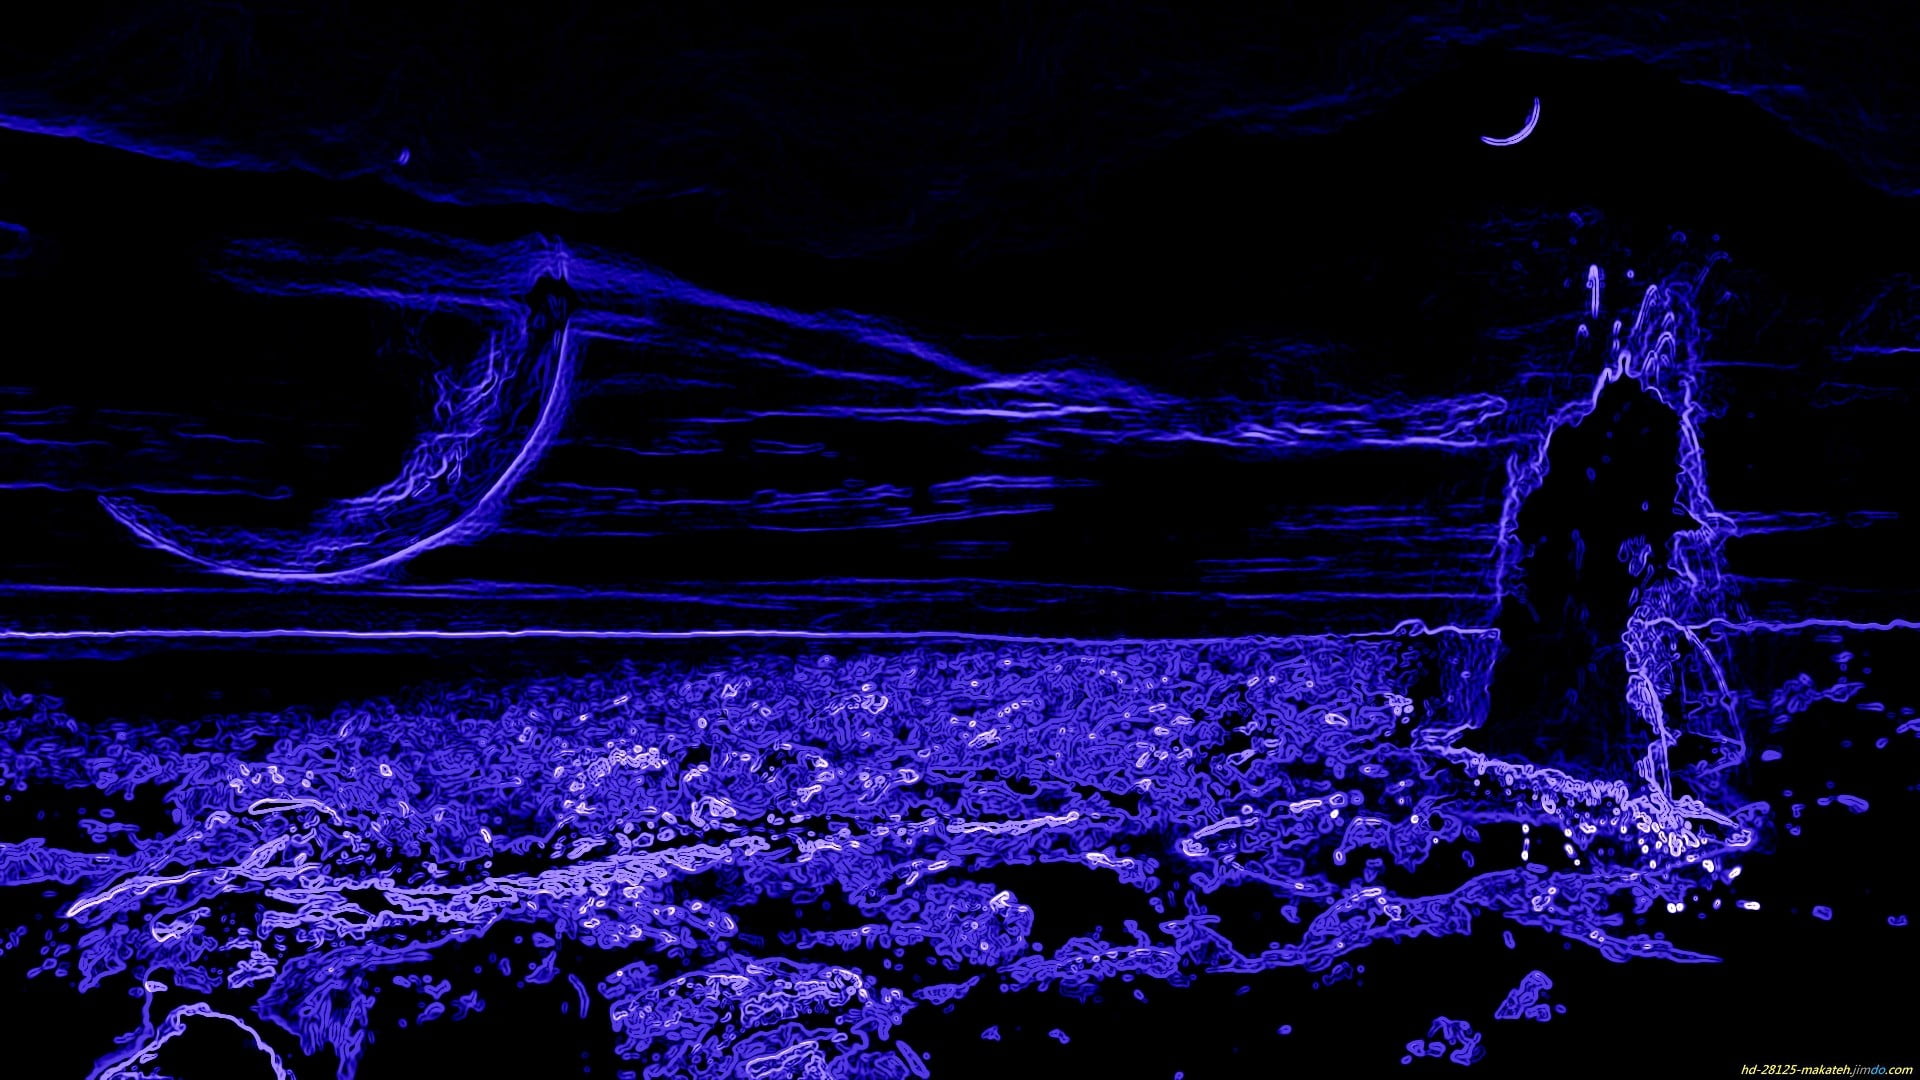 purple and black poster, abstract, blue, night, no people, nature